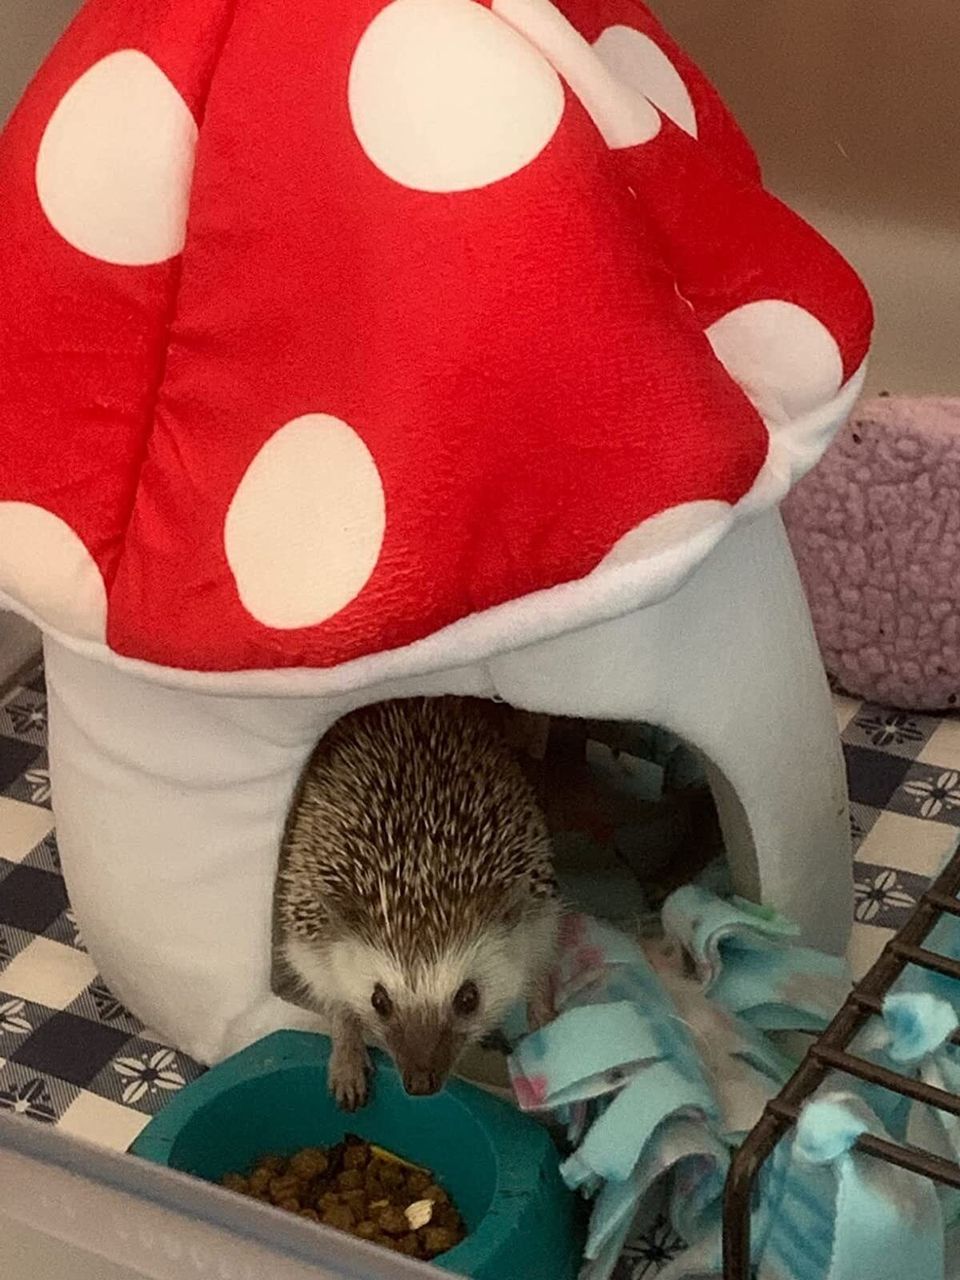 And an equally cozy-looking home for your rodent shaped like a mushroom or peach so you can both feel like you're living in a fairytale storybook.